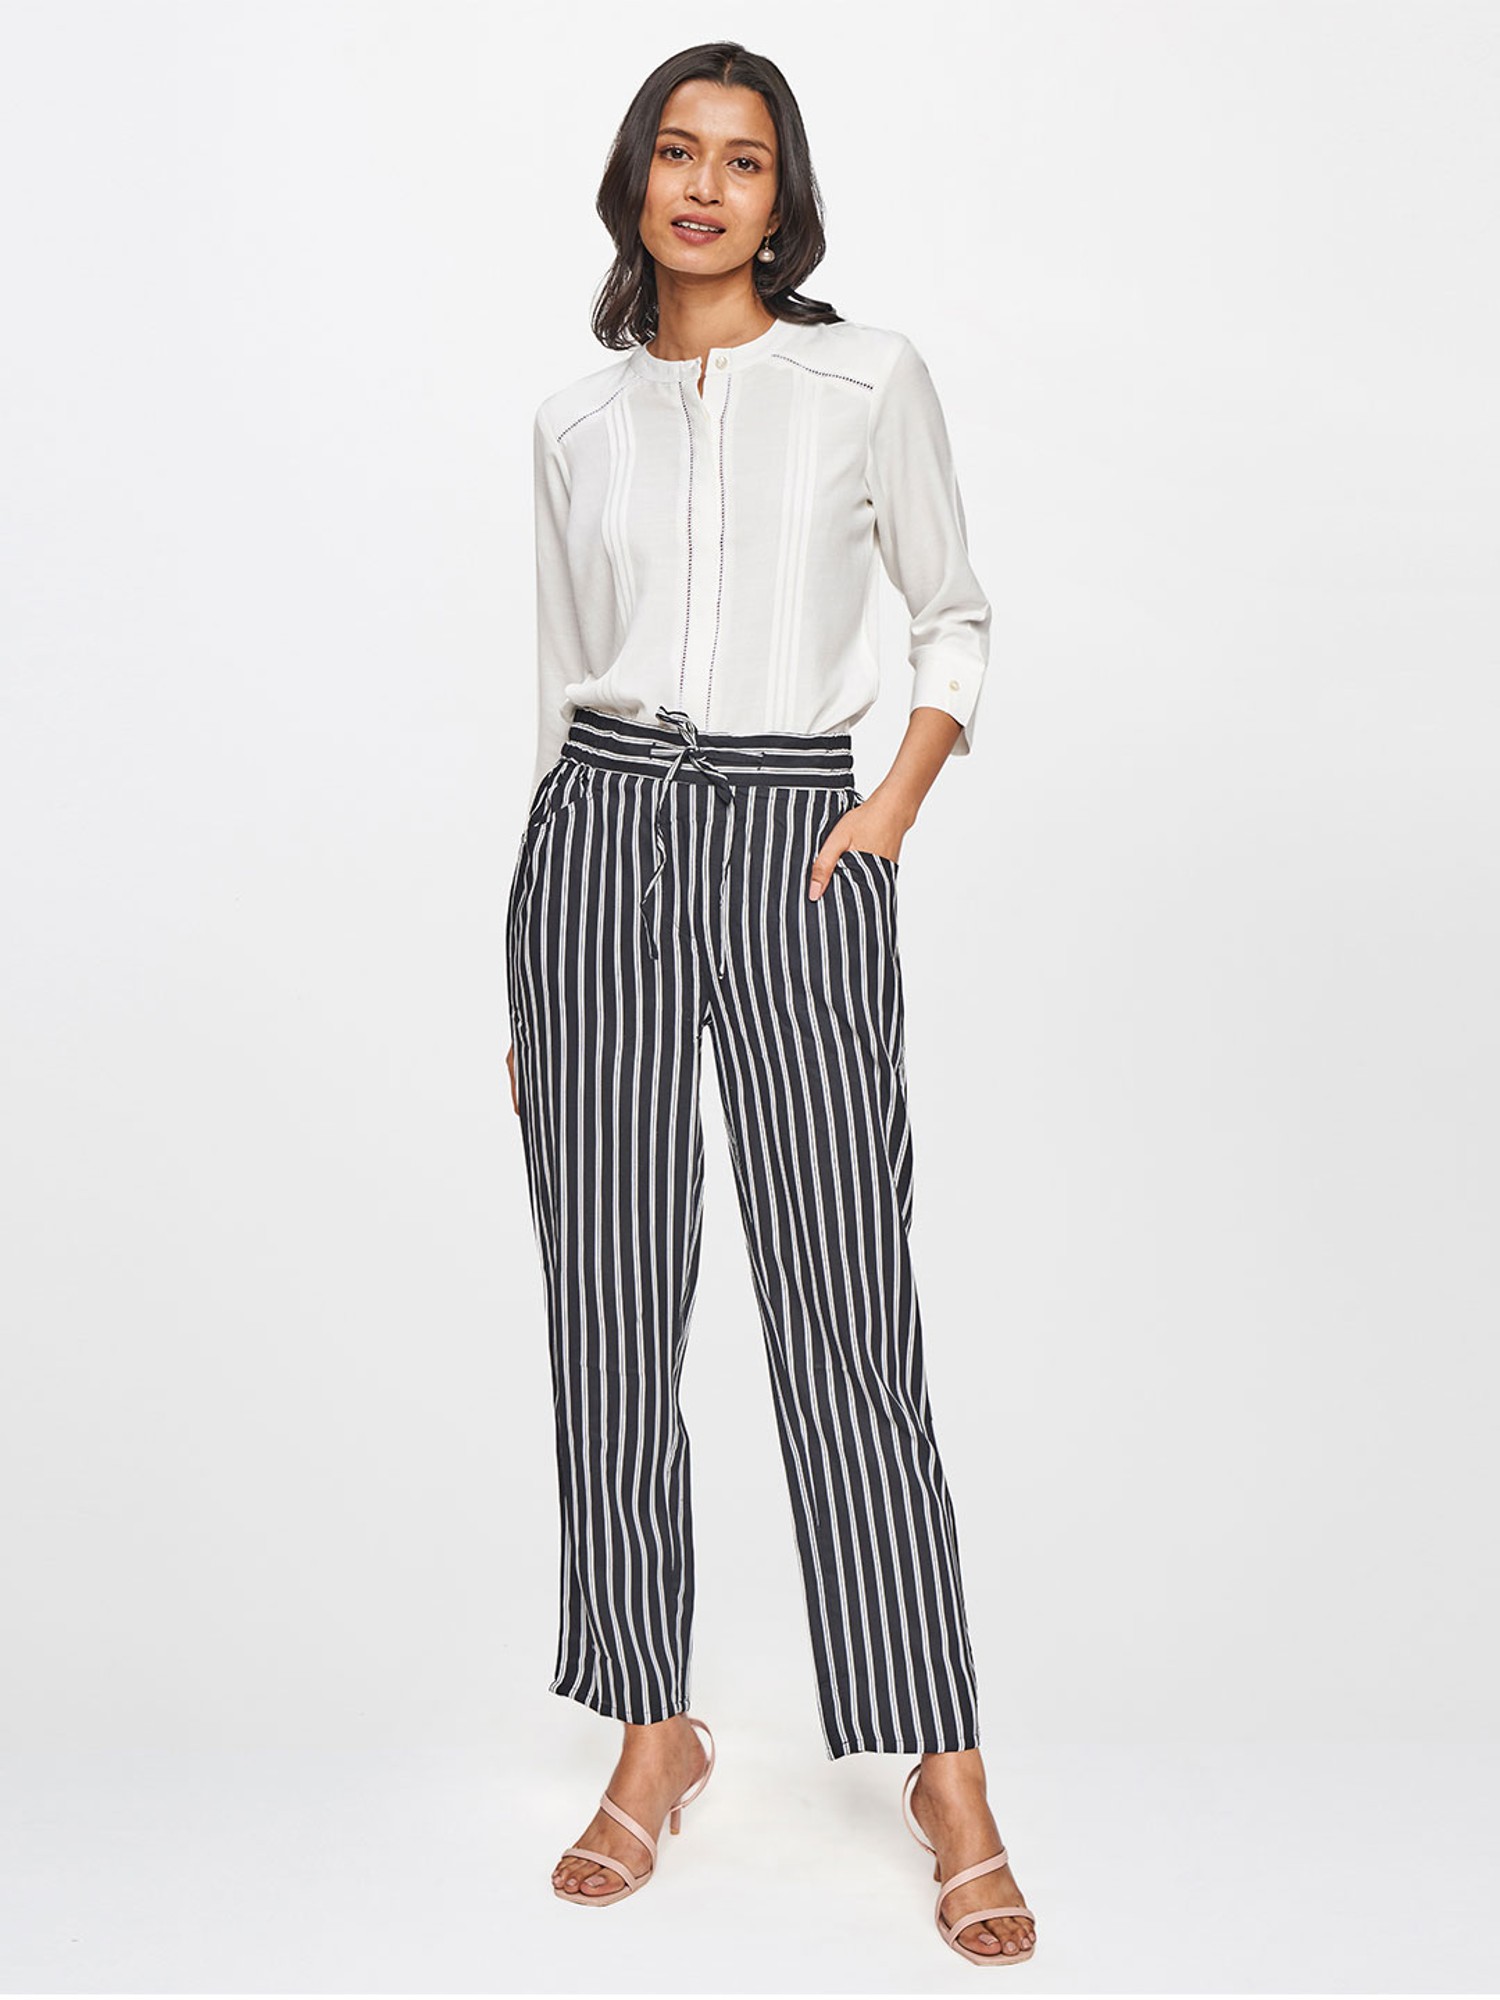 Buy FORMAL AGREEMENT BLACK STRIPED PANTS for Women Online in India